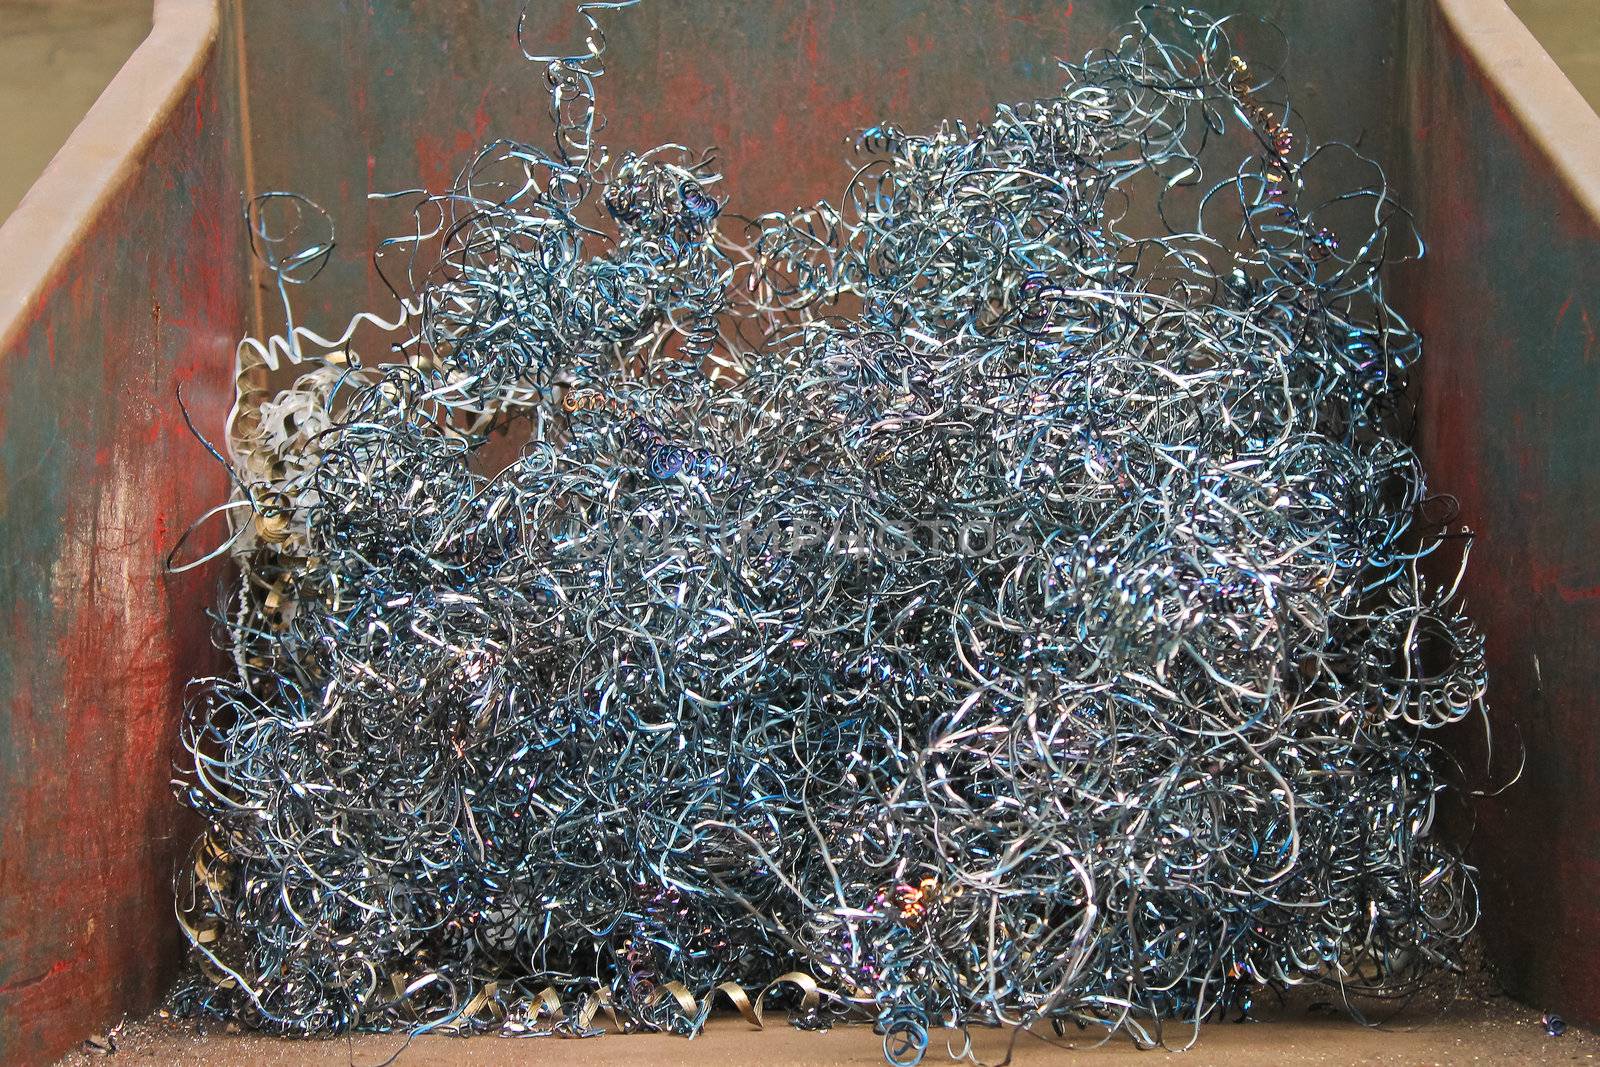 Metal shavings in a container